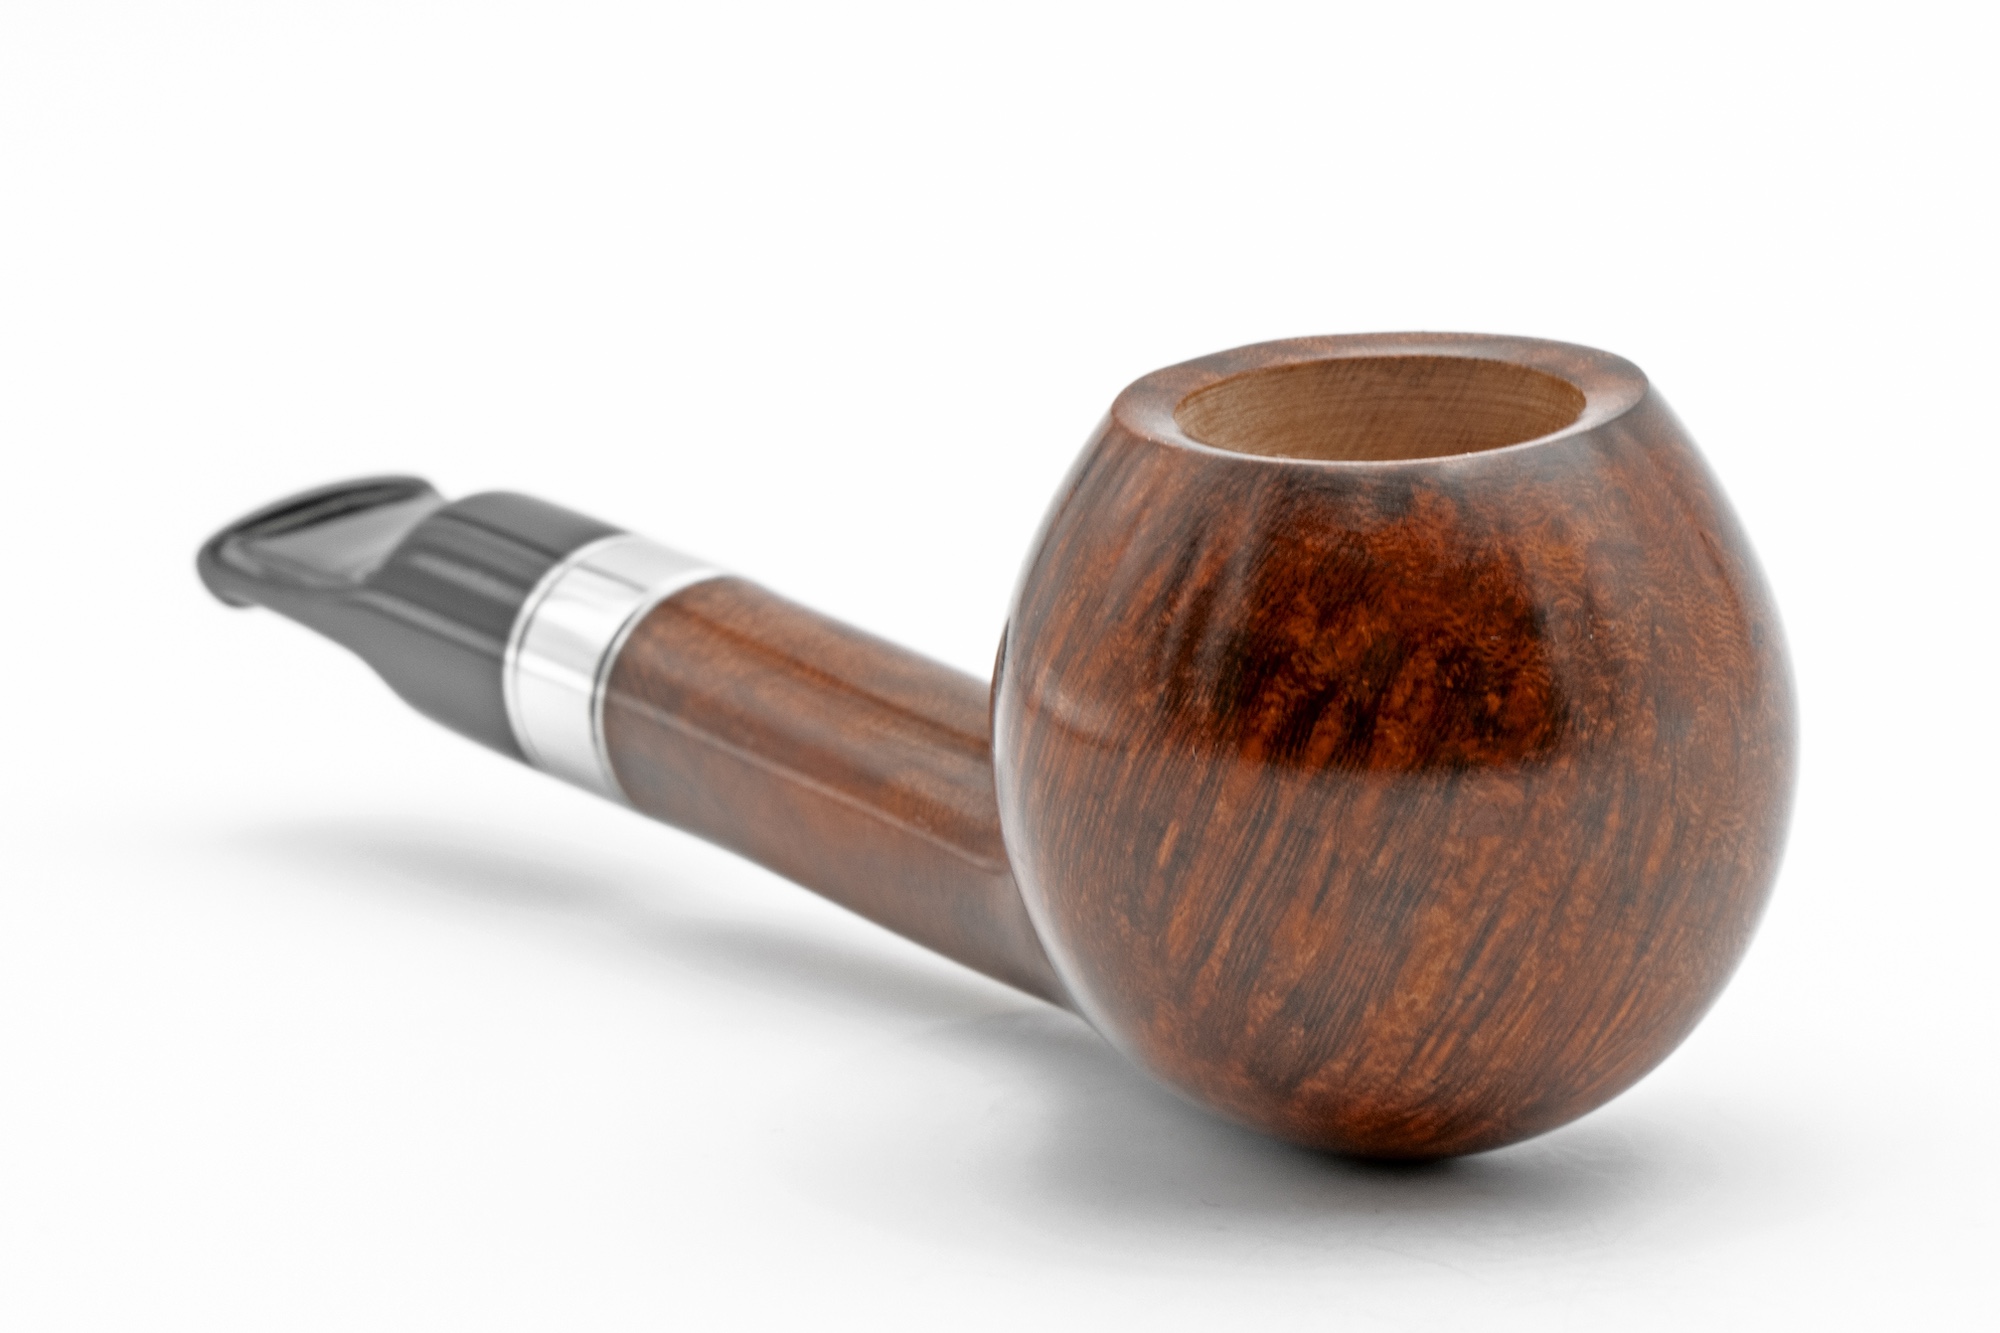 Rattray's Lil Pipe Terracotta 173